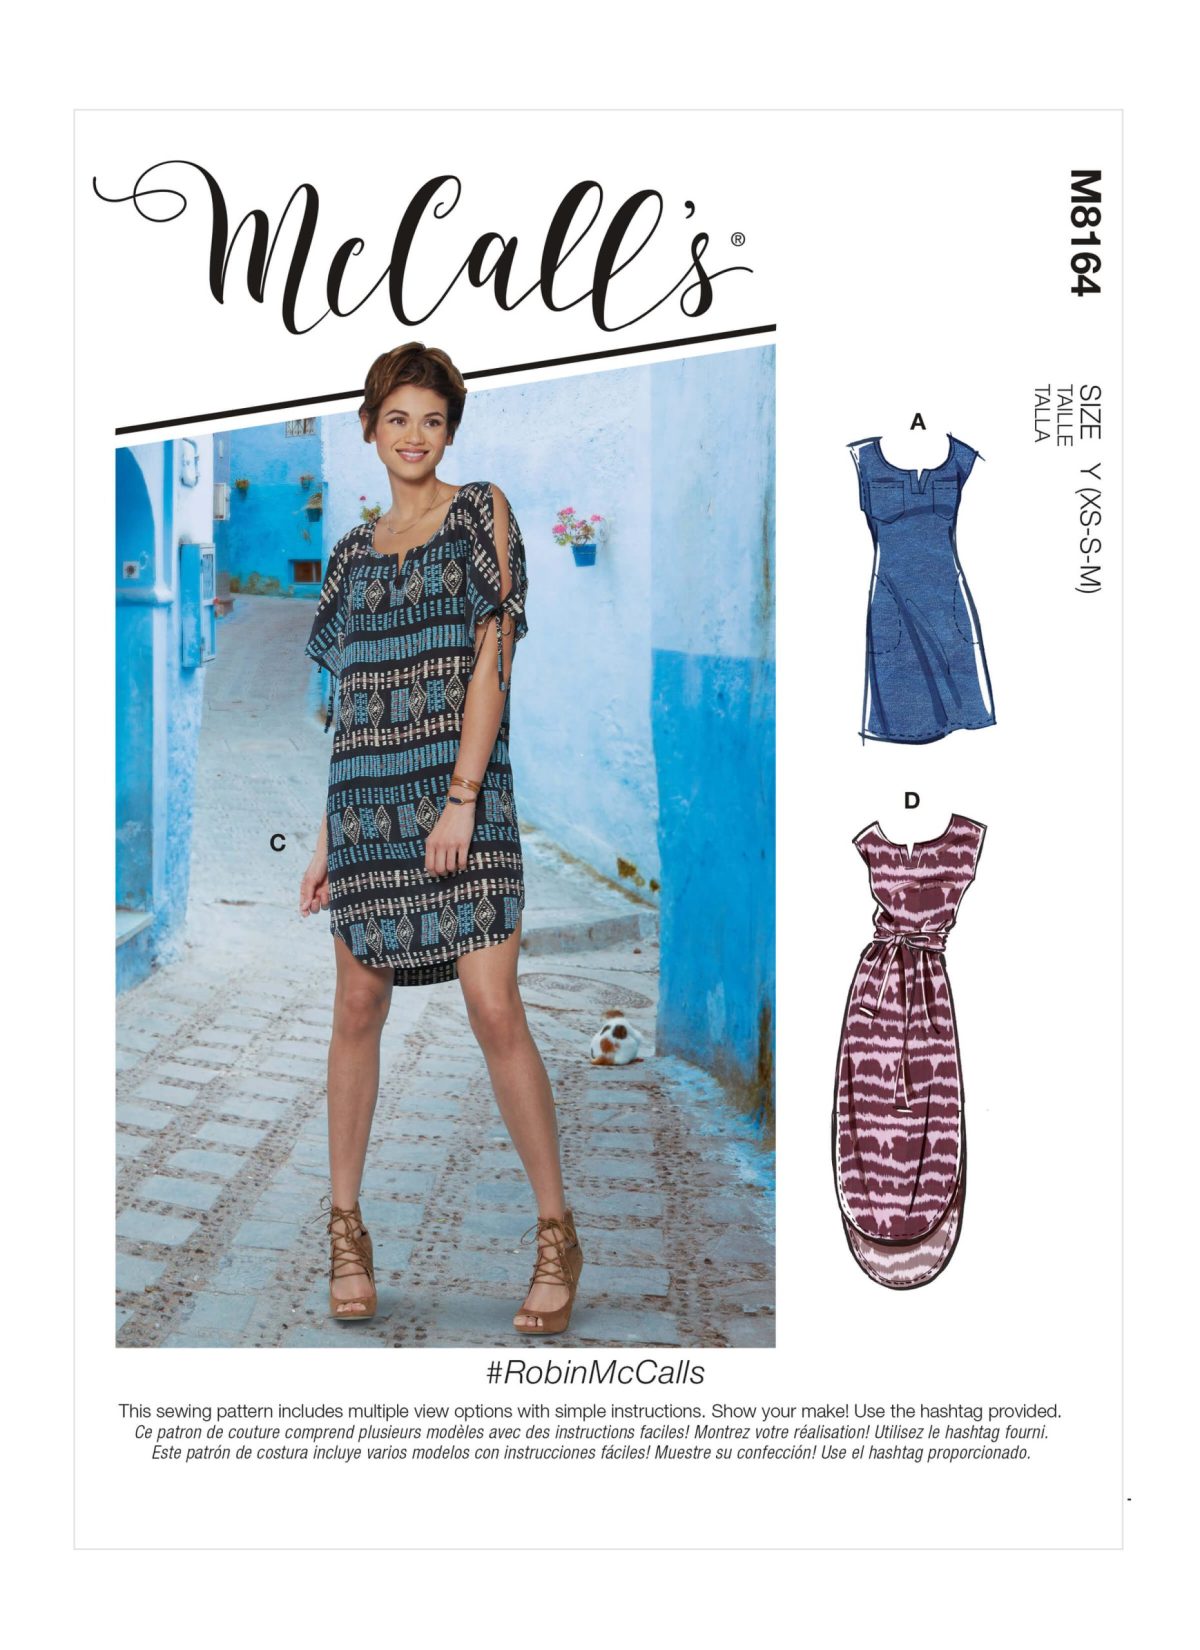 McCall's Sewing Pattern M8164 Misses' Dresses With Sleeve Ties, Pocket Variations and Belt #RobinMcCalls